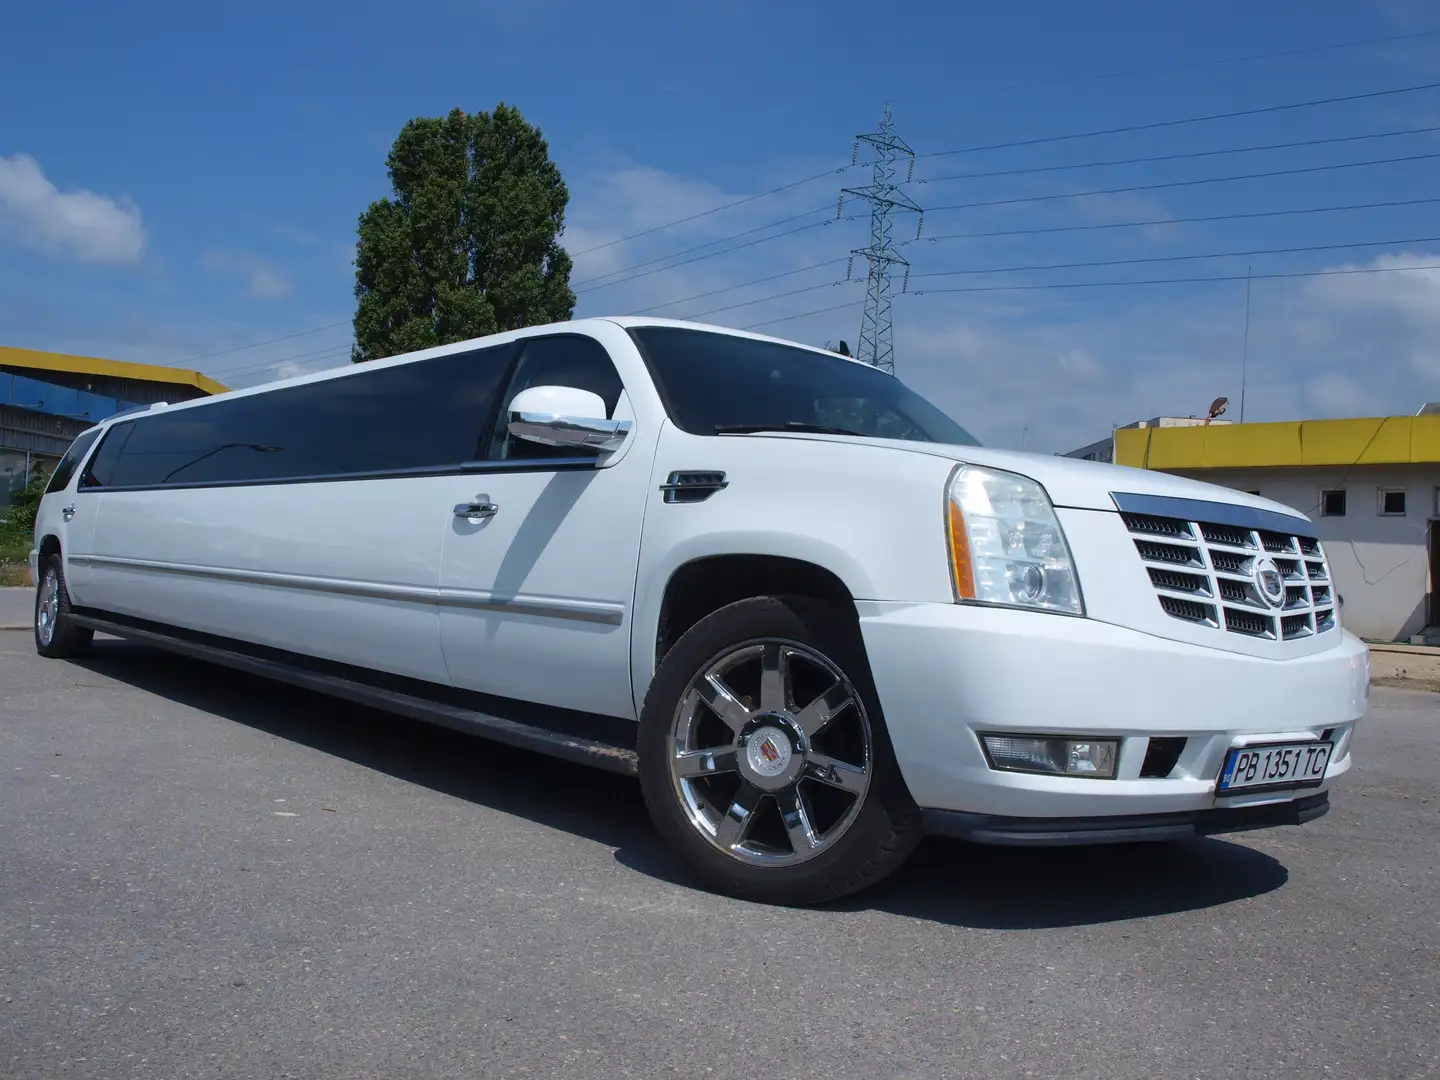 Cadillac Escalade 203-inch Stretch Limousine by Moonlight Industries Beyaz - 1